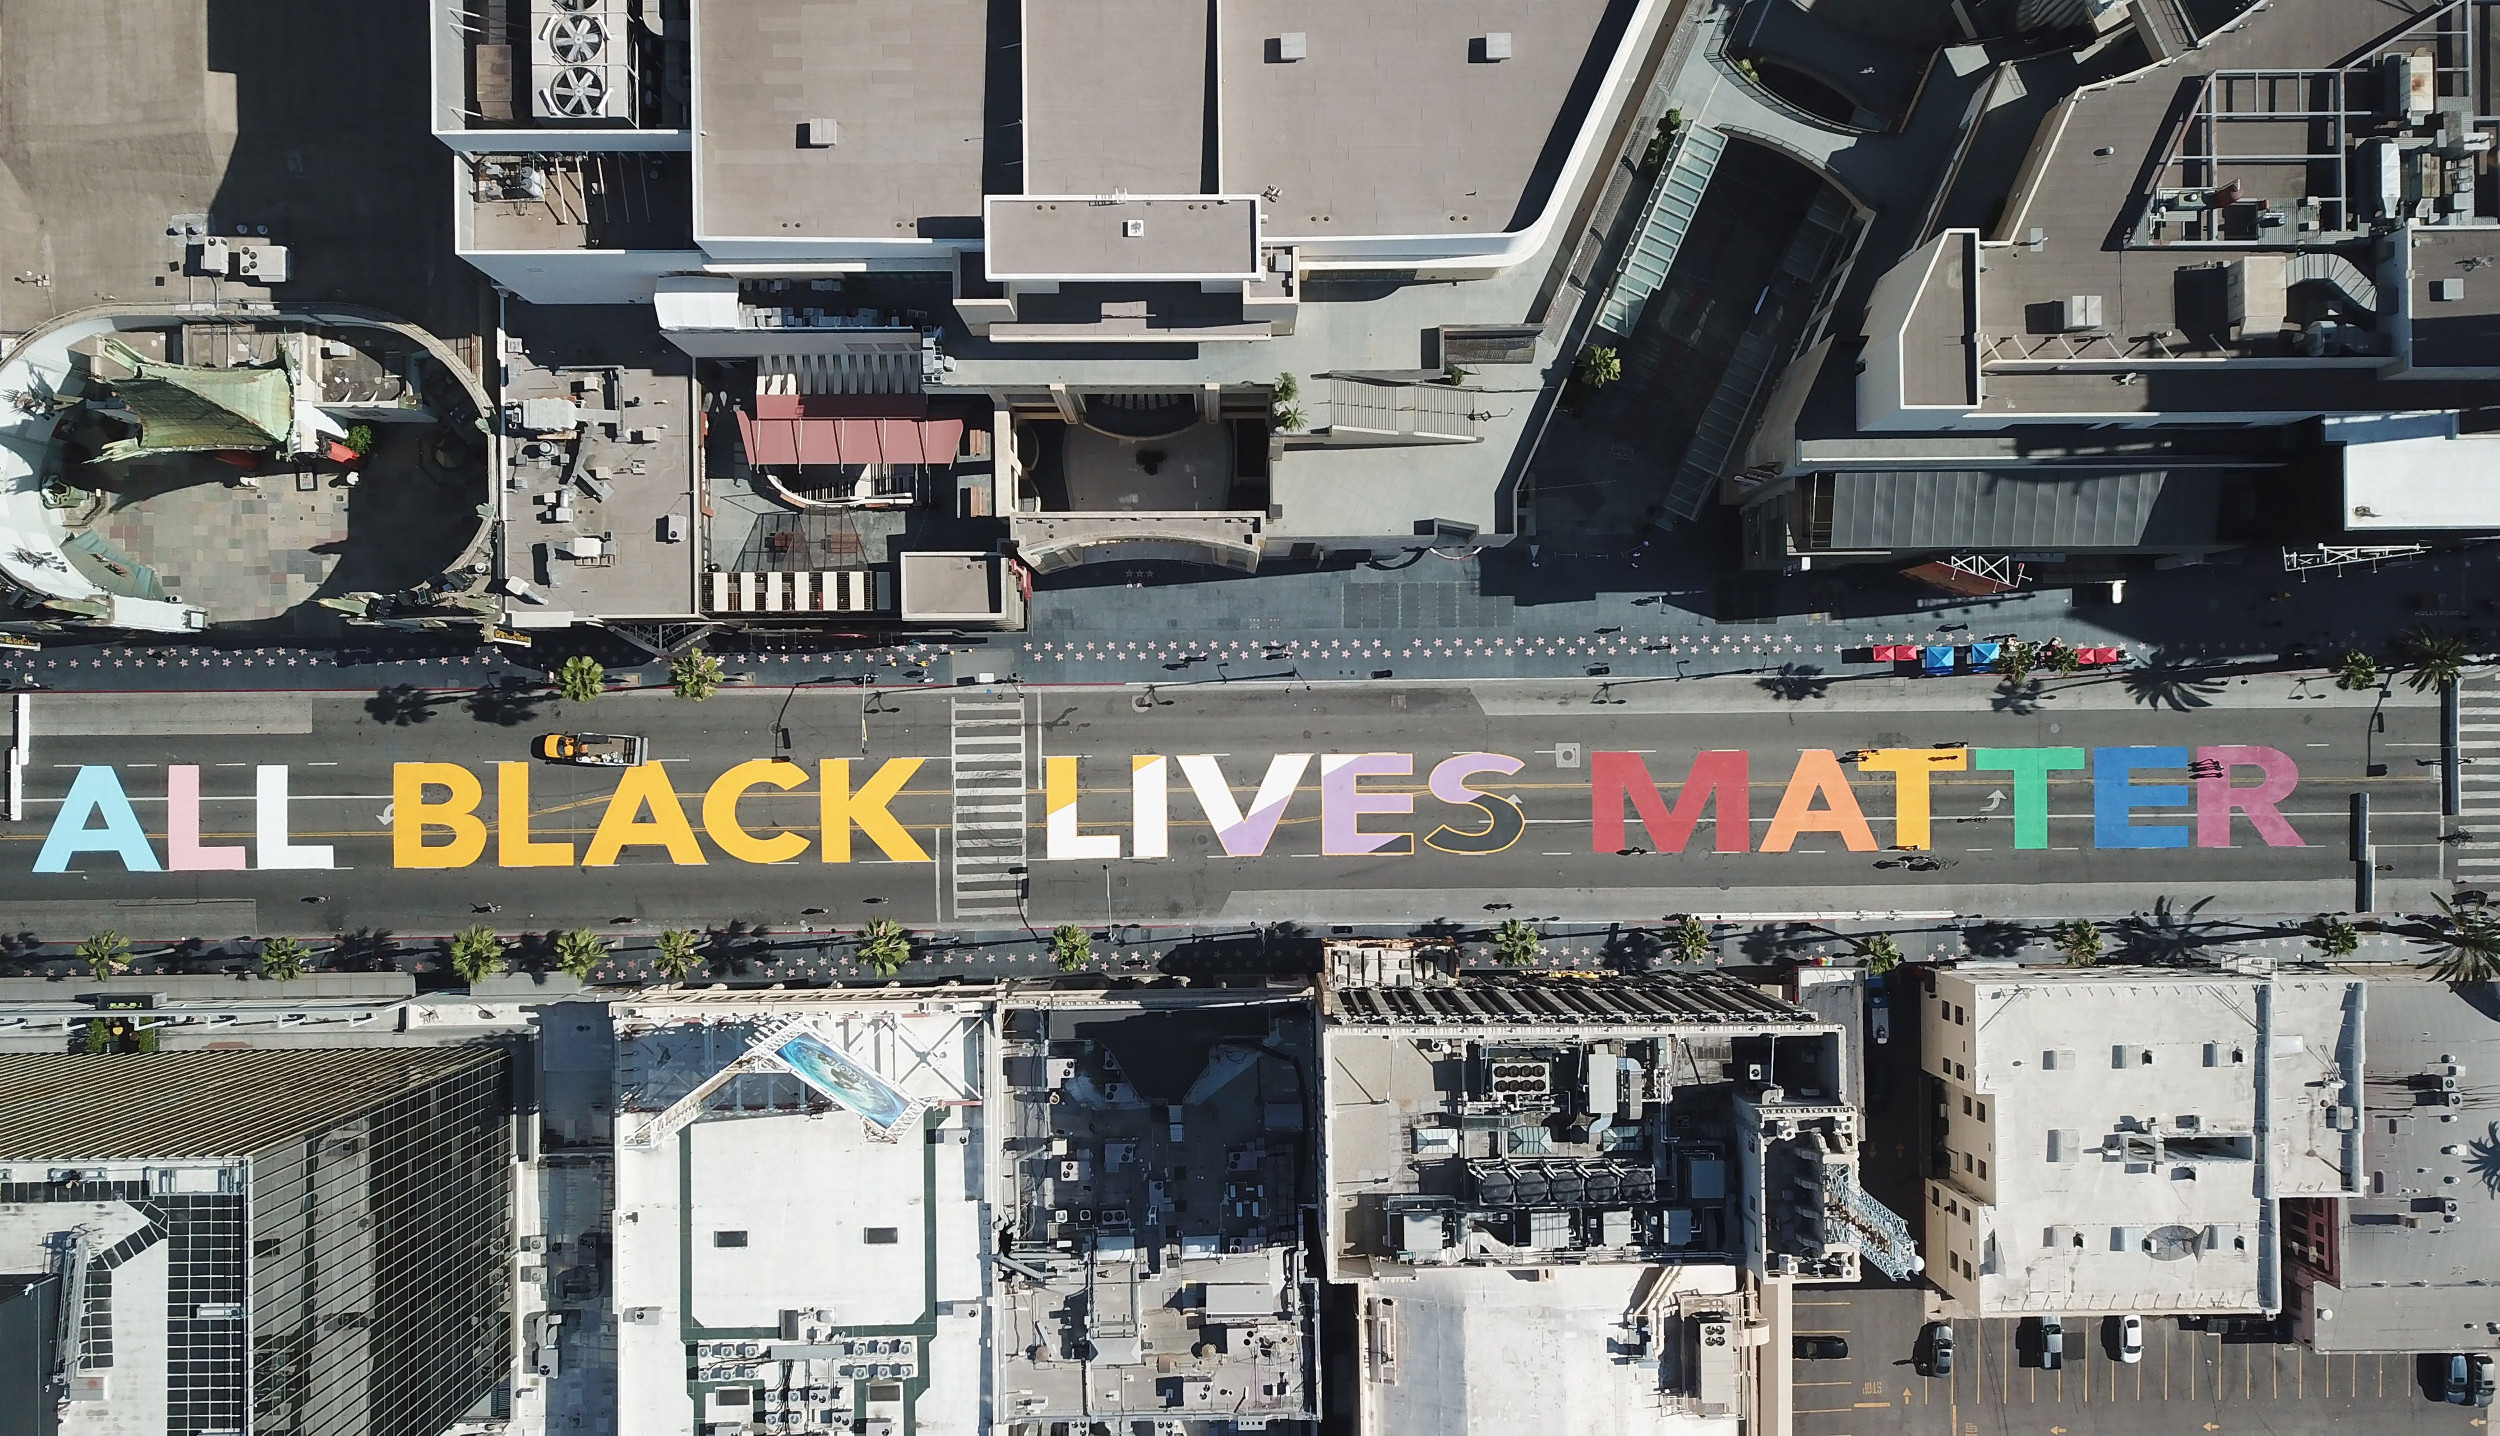 All Black Lives Matter Mural Painted On Hollywood Boulevard Washed